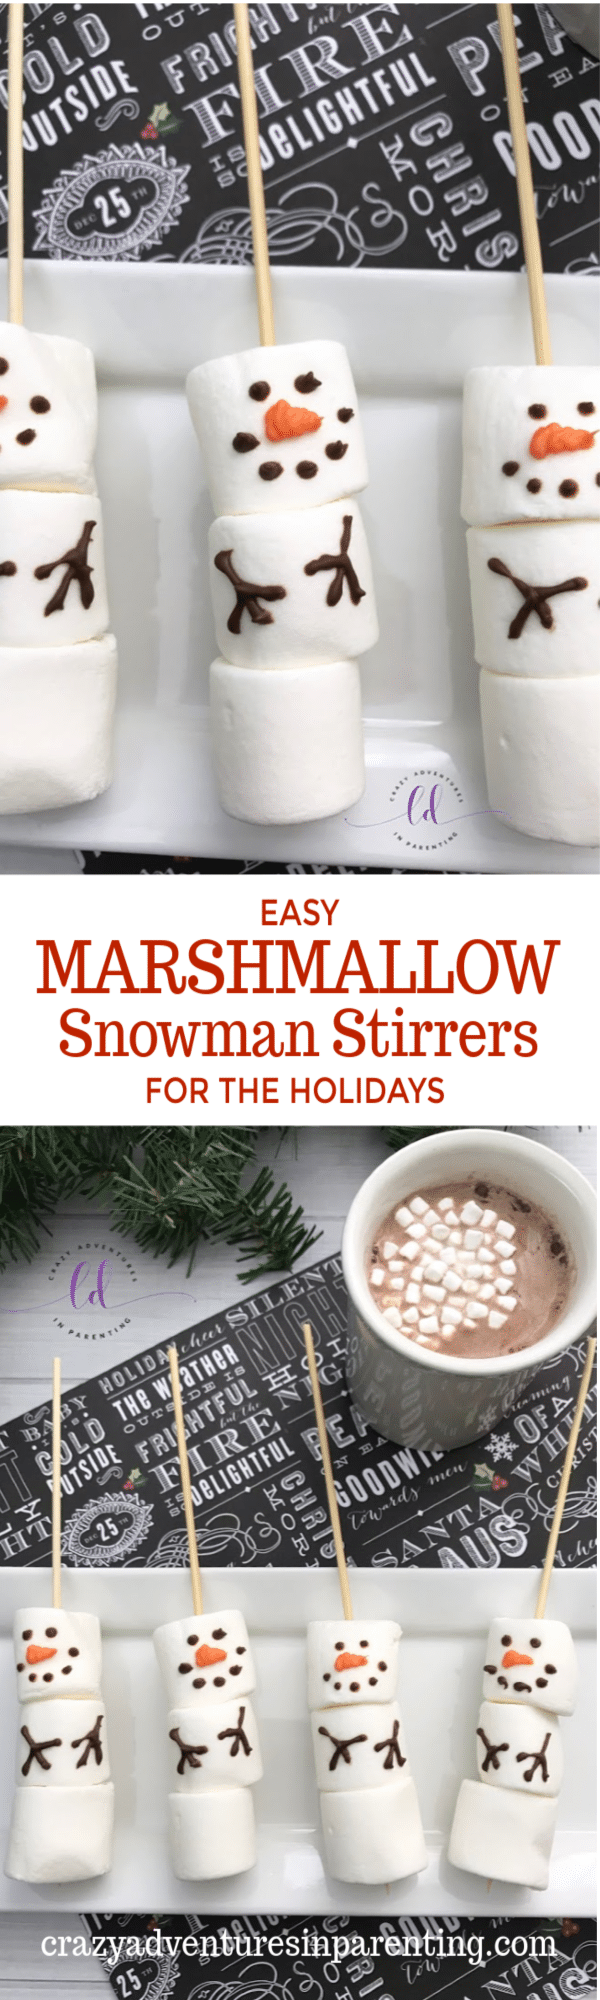 Easy Marshmallow Snowman Stirrers for the Holidays